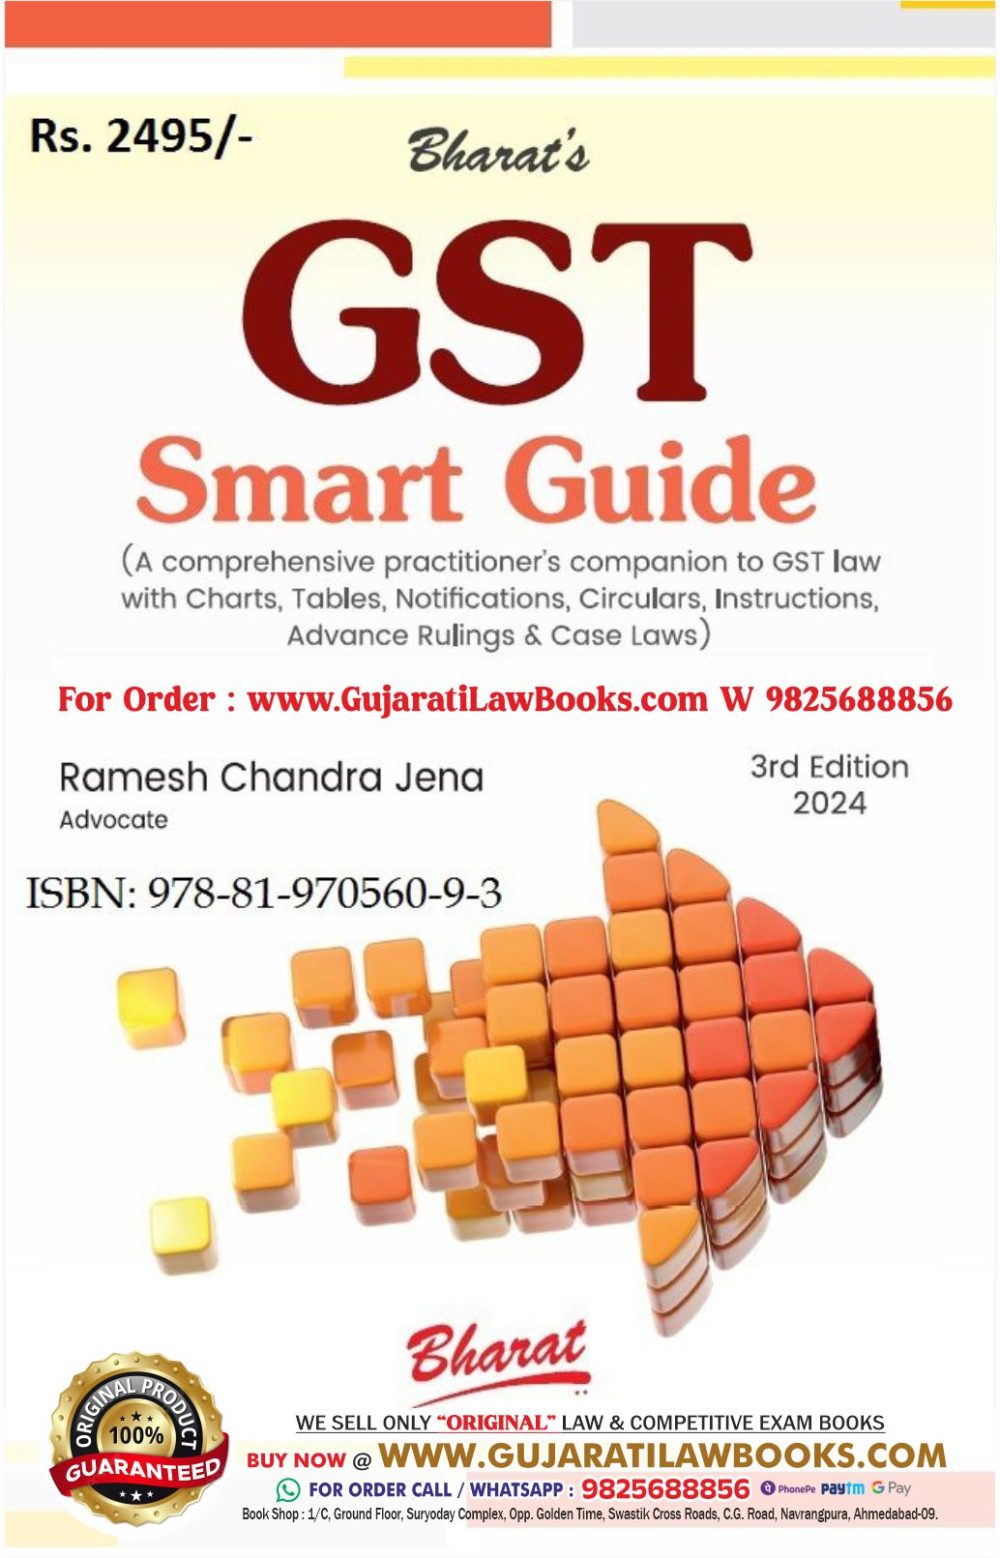 Bharat's GST SMART GUIDE - Latest 3rd Edition March 2024